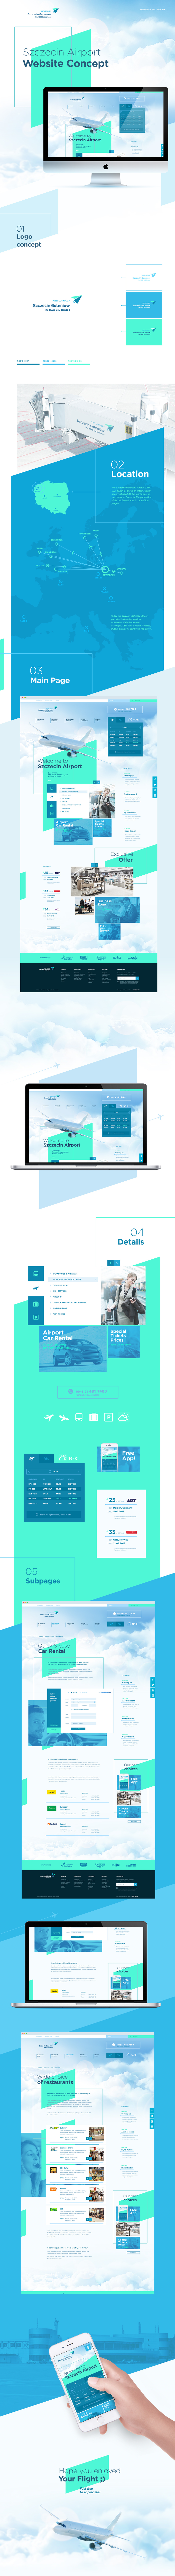 airport plane Web logo flight Fly mobile UI SKY airplane Jet airline